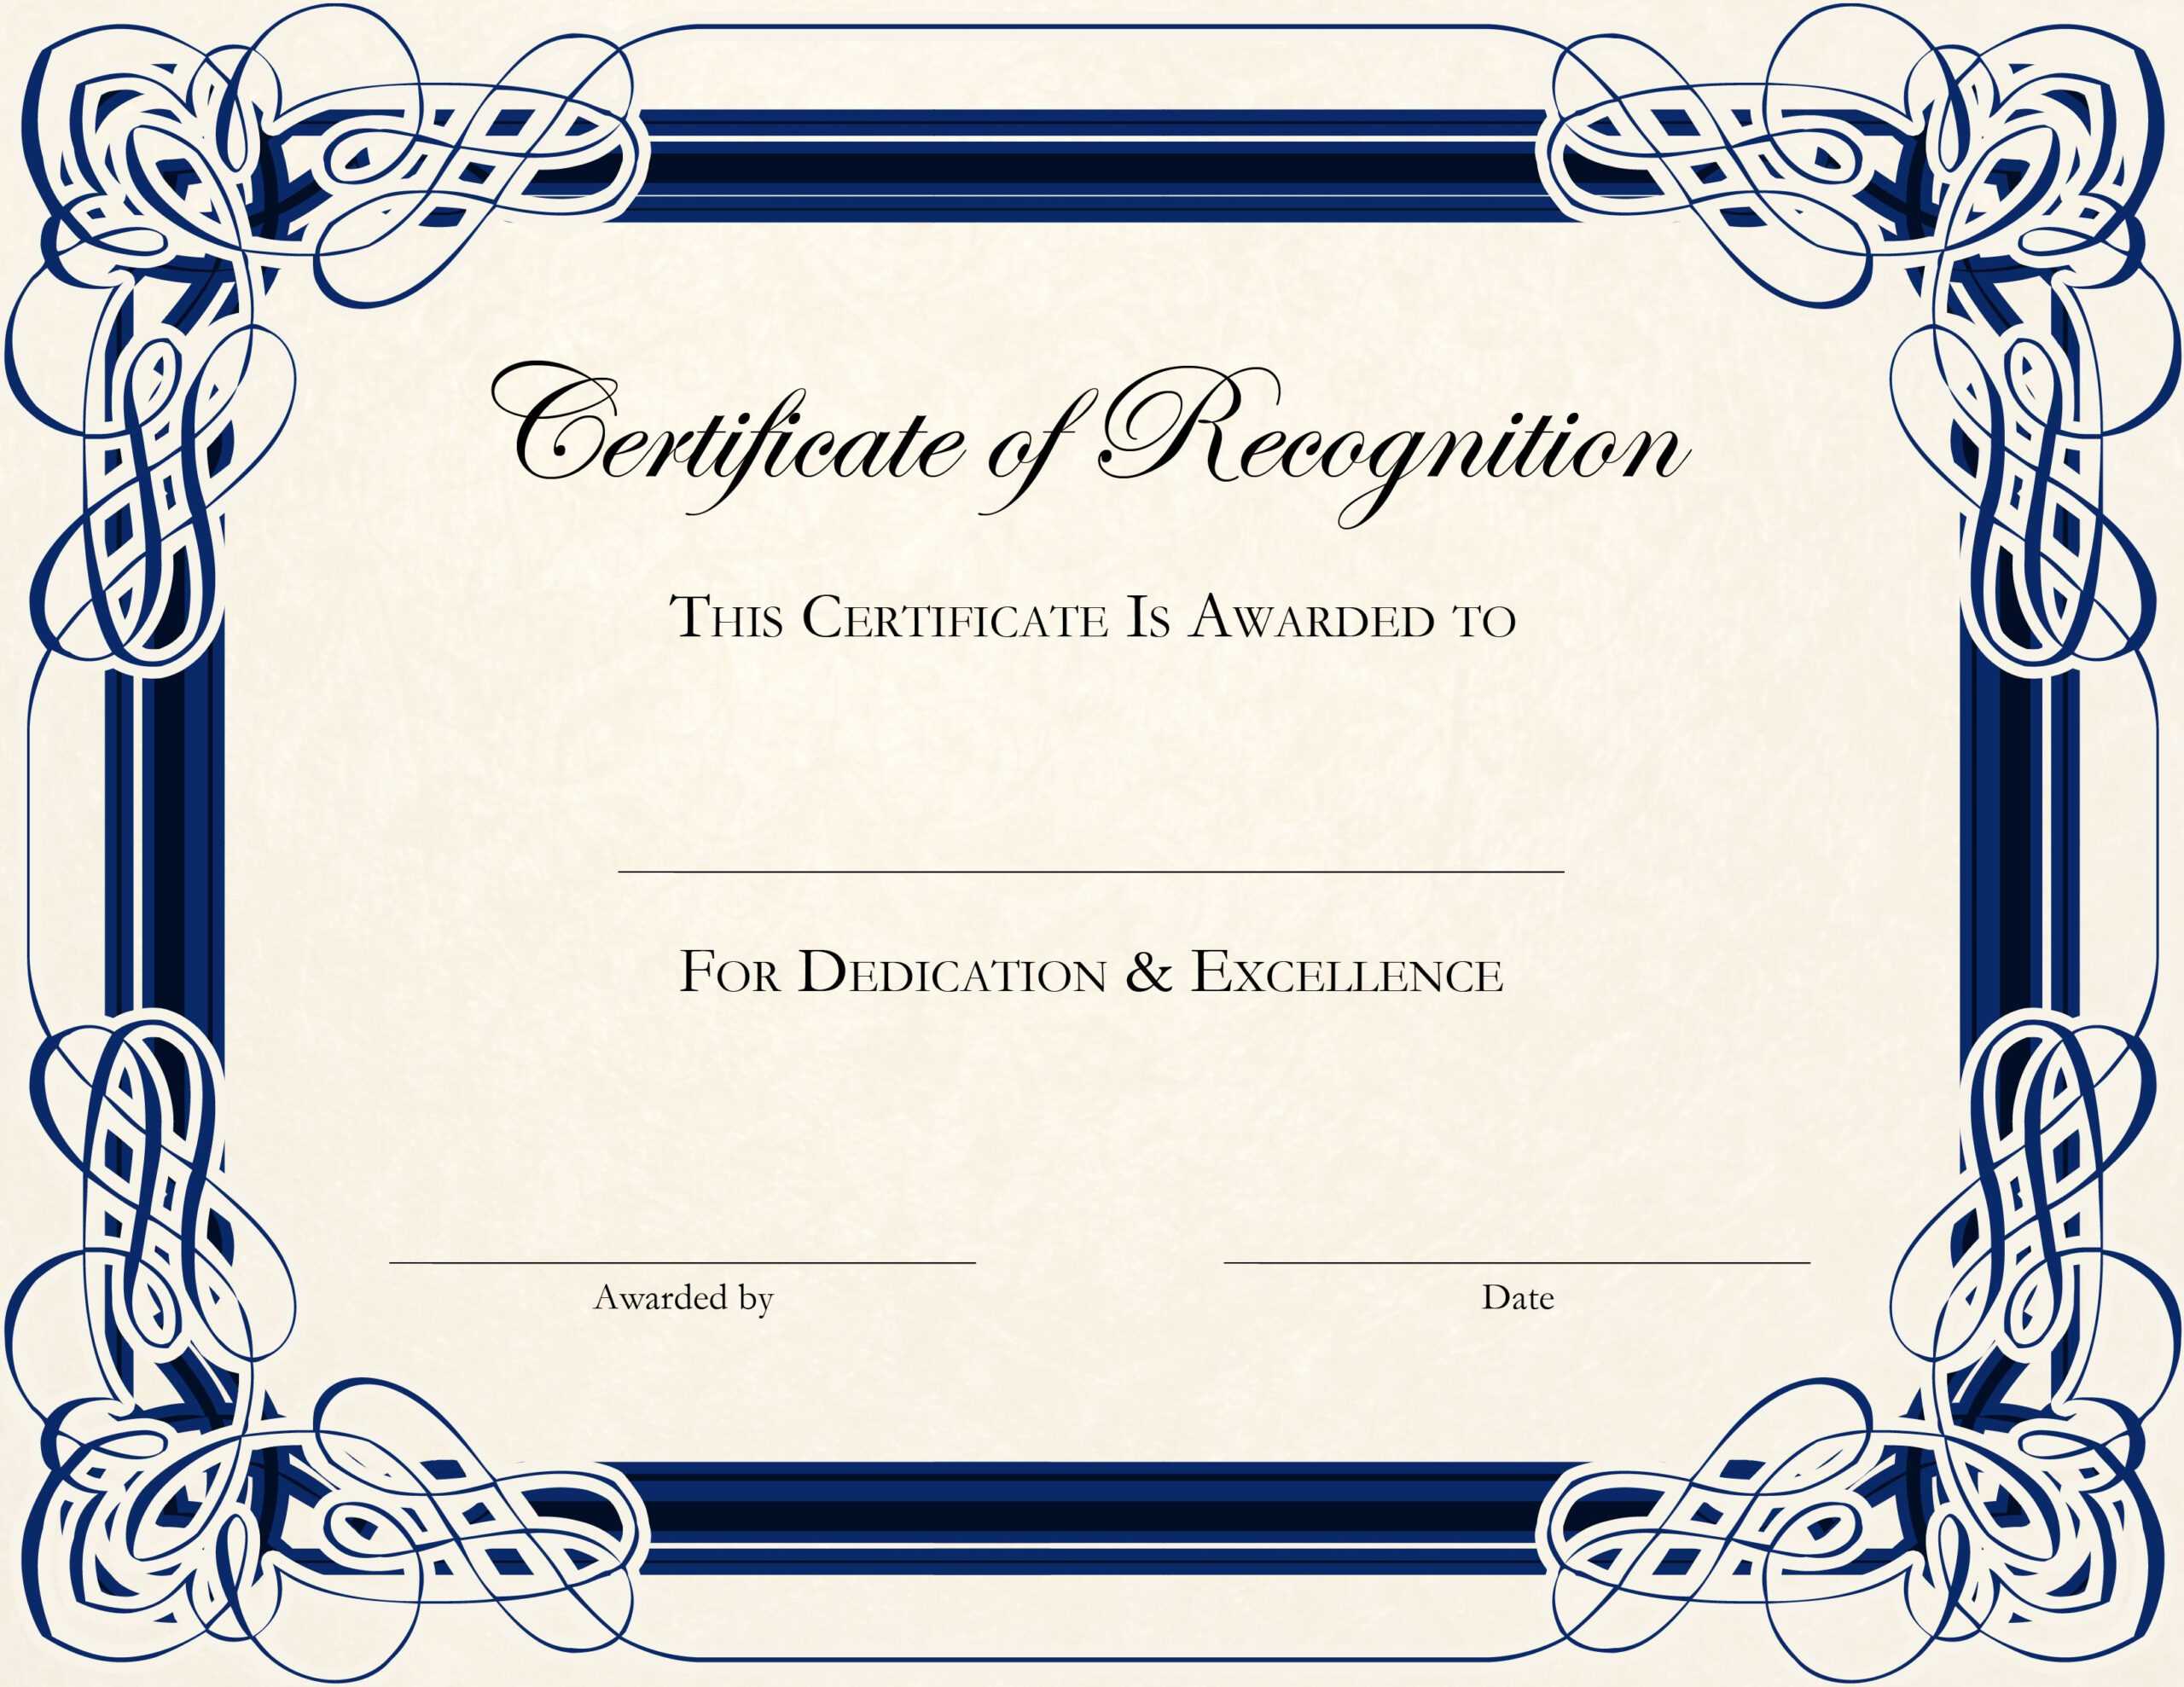 Certificate Of Appreciation Template Word Doc – Ceyran Inside Certificate Of Excellence Template Word